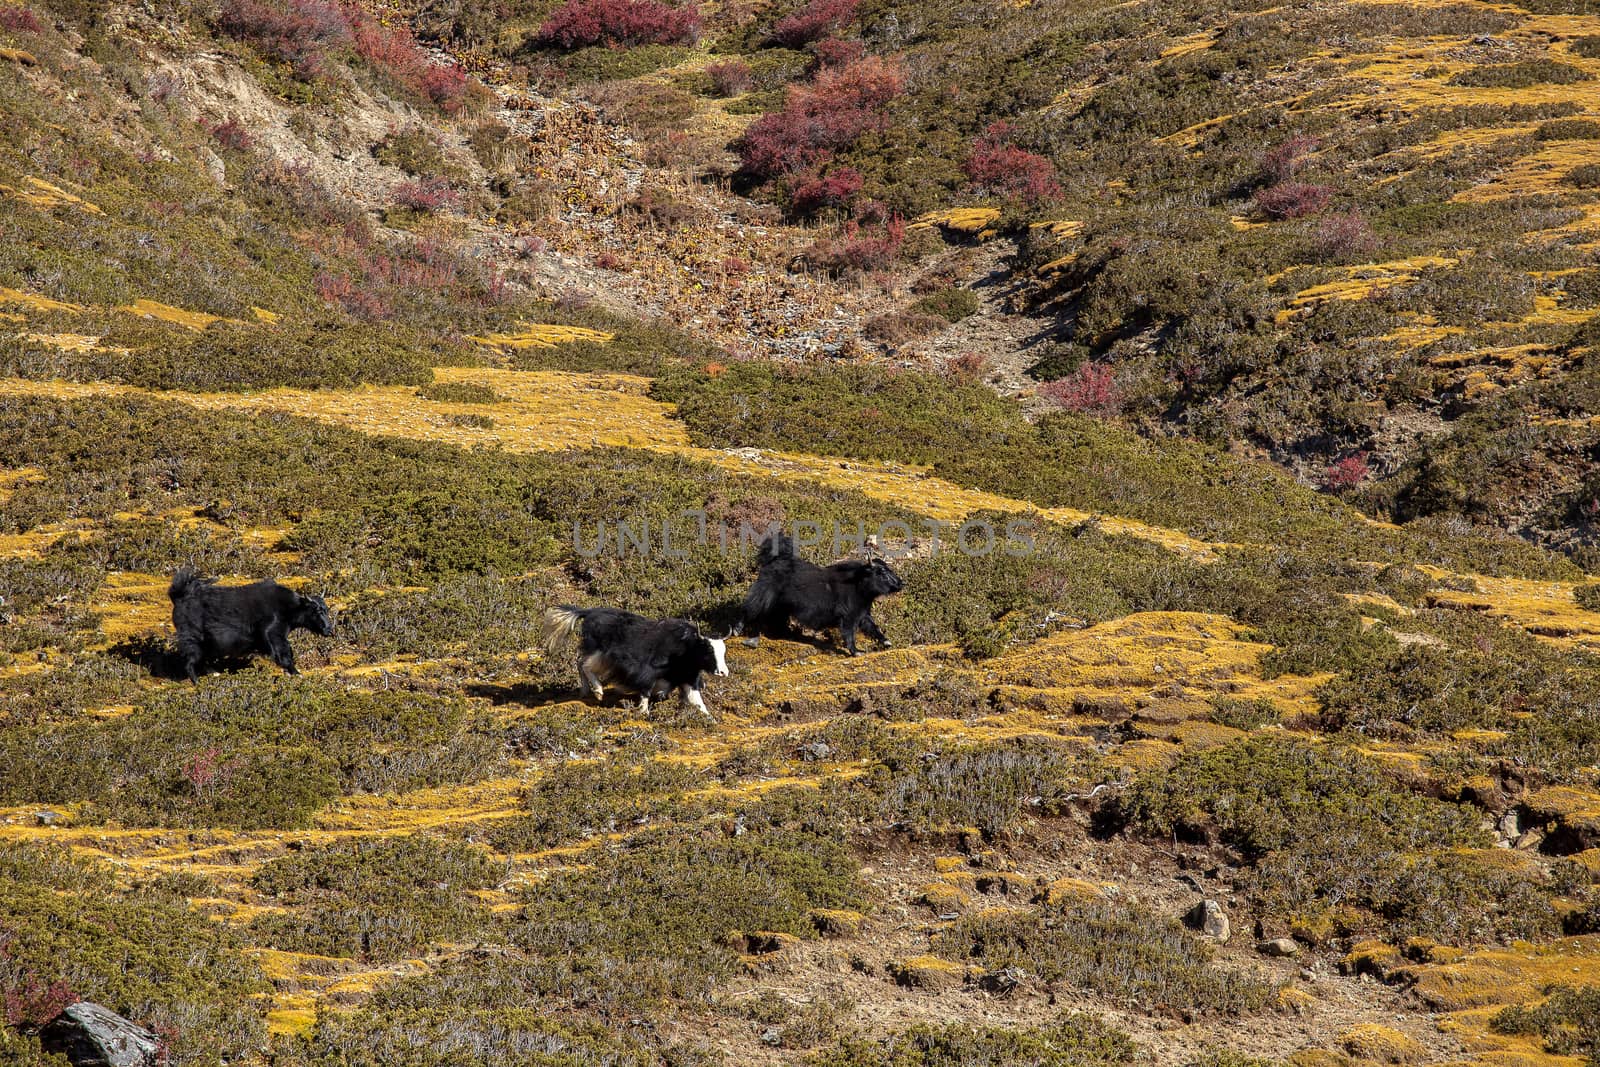 Black yaks graze high in the mountains.